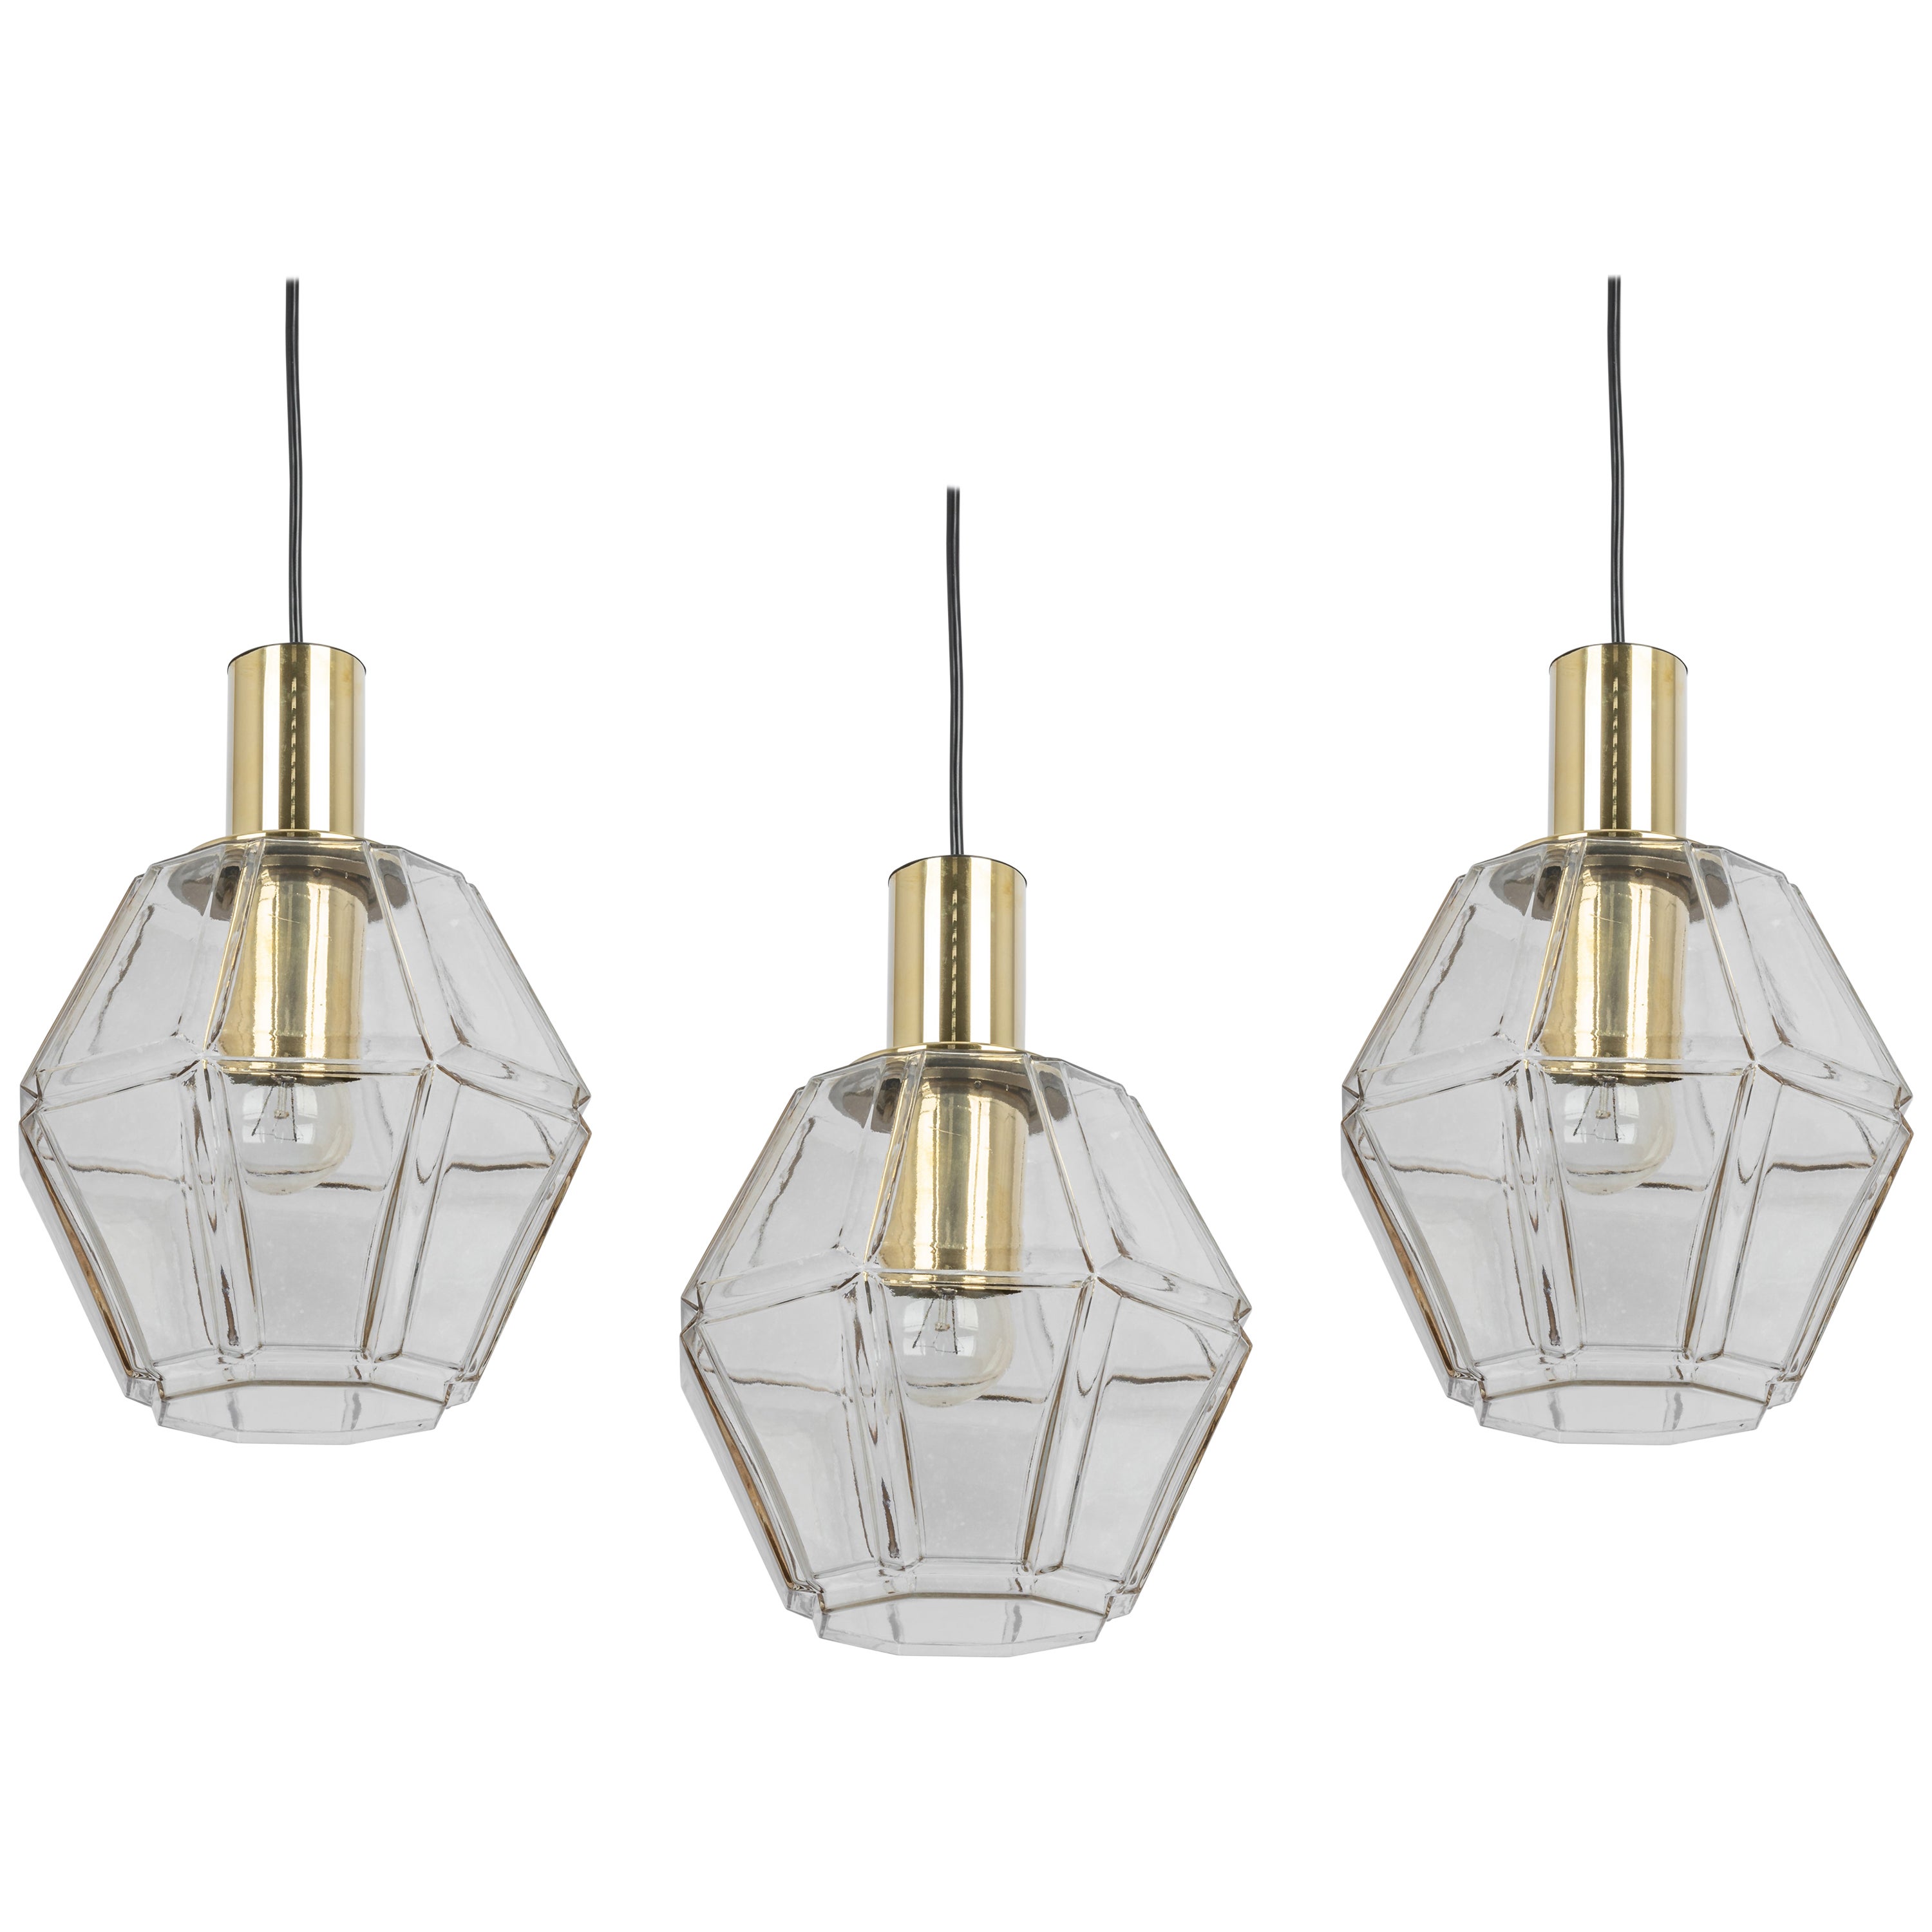 1 of 3 Glass Pendant lights by Limburg, Germany, 1970s For Sale